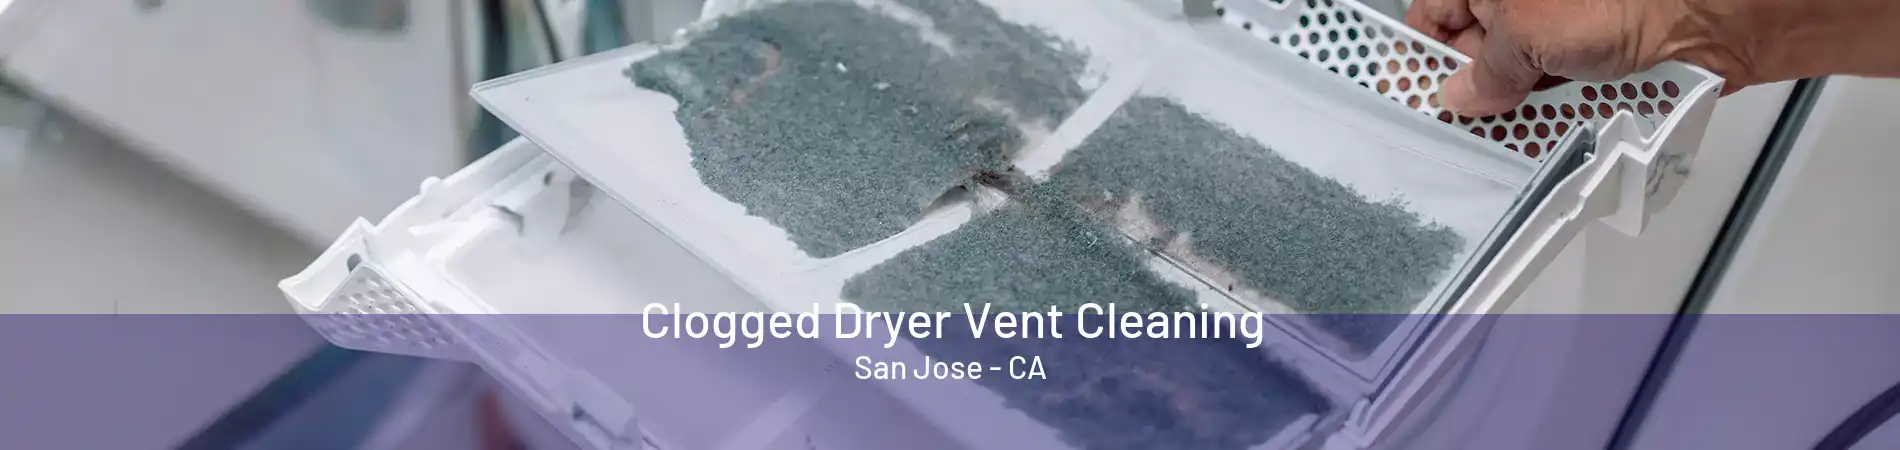 Clogged Dryer Vent Cleaning San Jose - CA